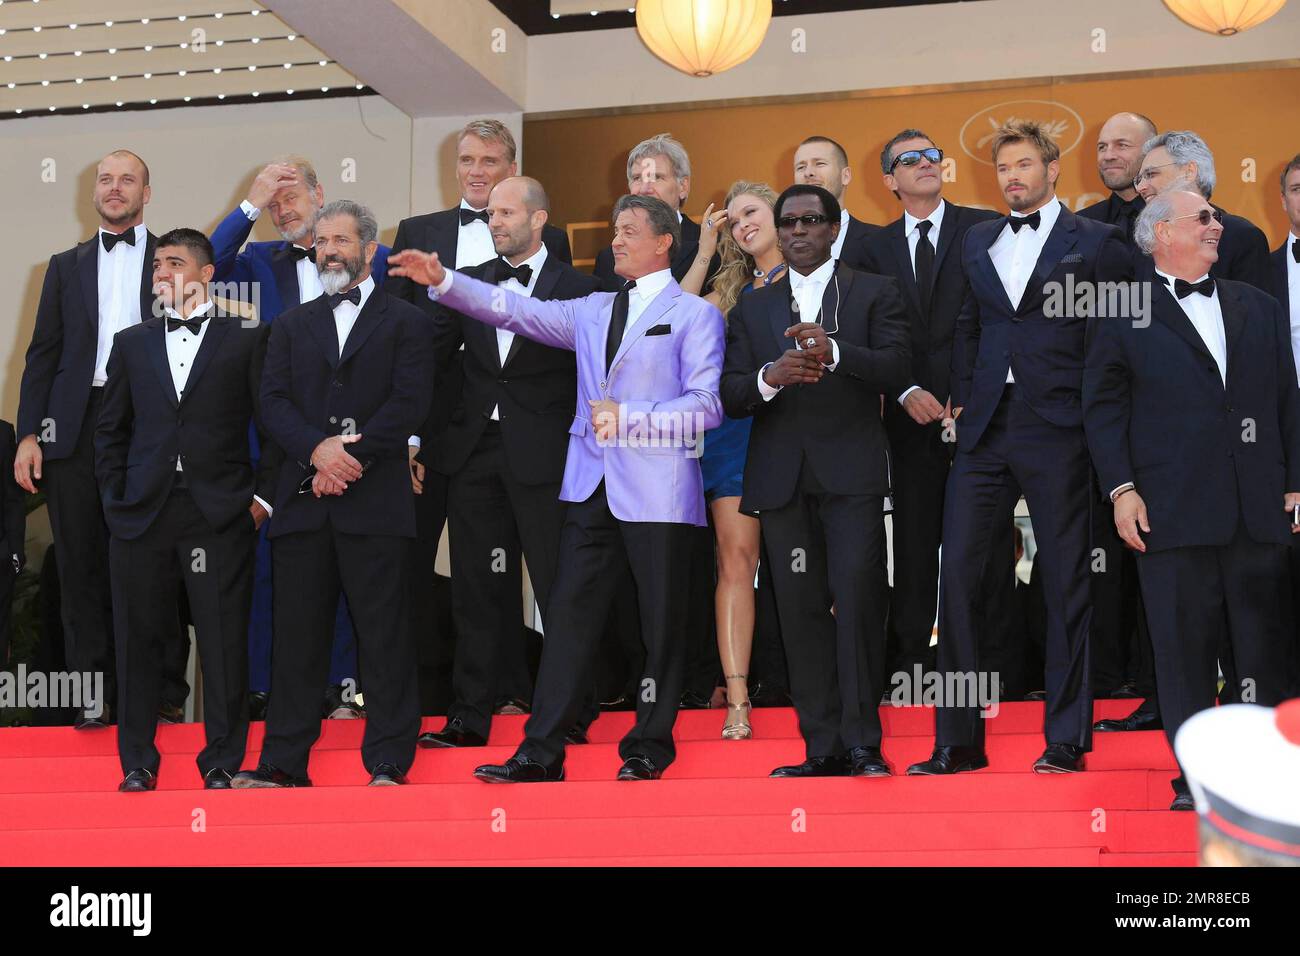 Dolph Lundgren, Victor Ortiz, Kelsey Grammer, Harrison Ford, director Patrick Hughes, Antonio Banderas, Mel Gibson, Jason Statham, Sylvester Stallone, Ronda Rousey, Wesley Snipes and Kellan Lutz at the “The Homesman” Premiere held at the Palais des Festivals during the 67th Annual Cannes Film Festival in Cannes, France. 18th May 2014. Stock Photo